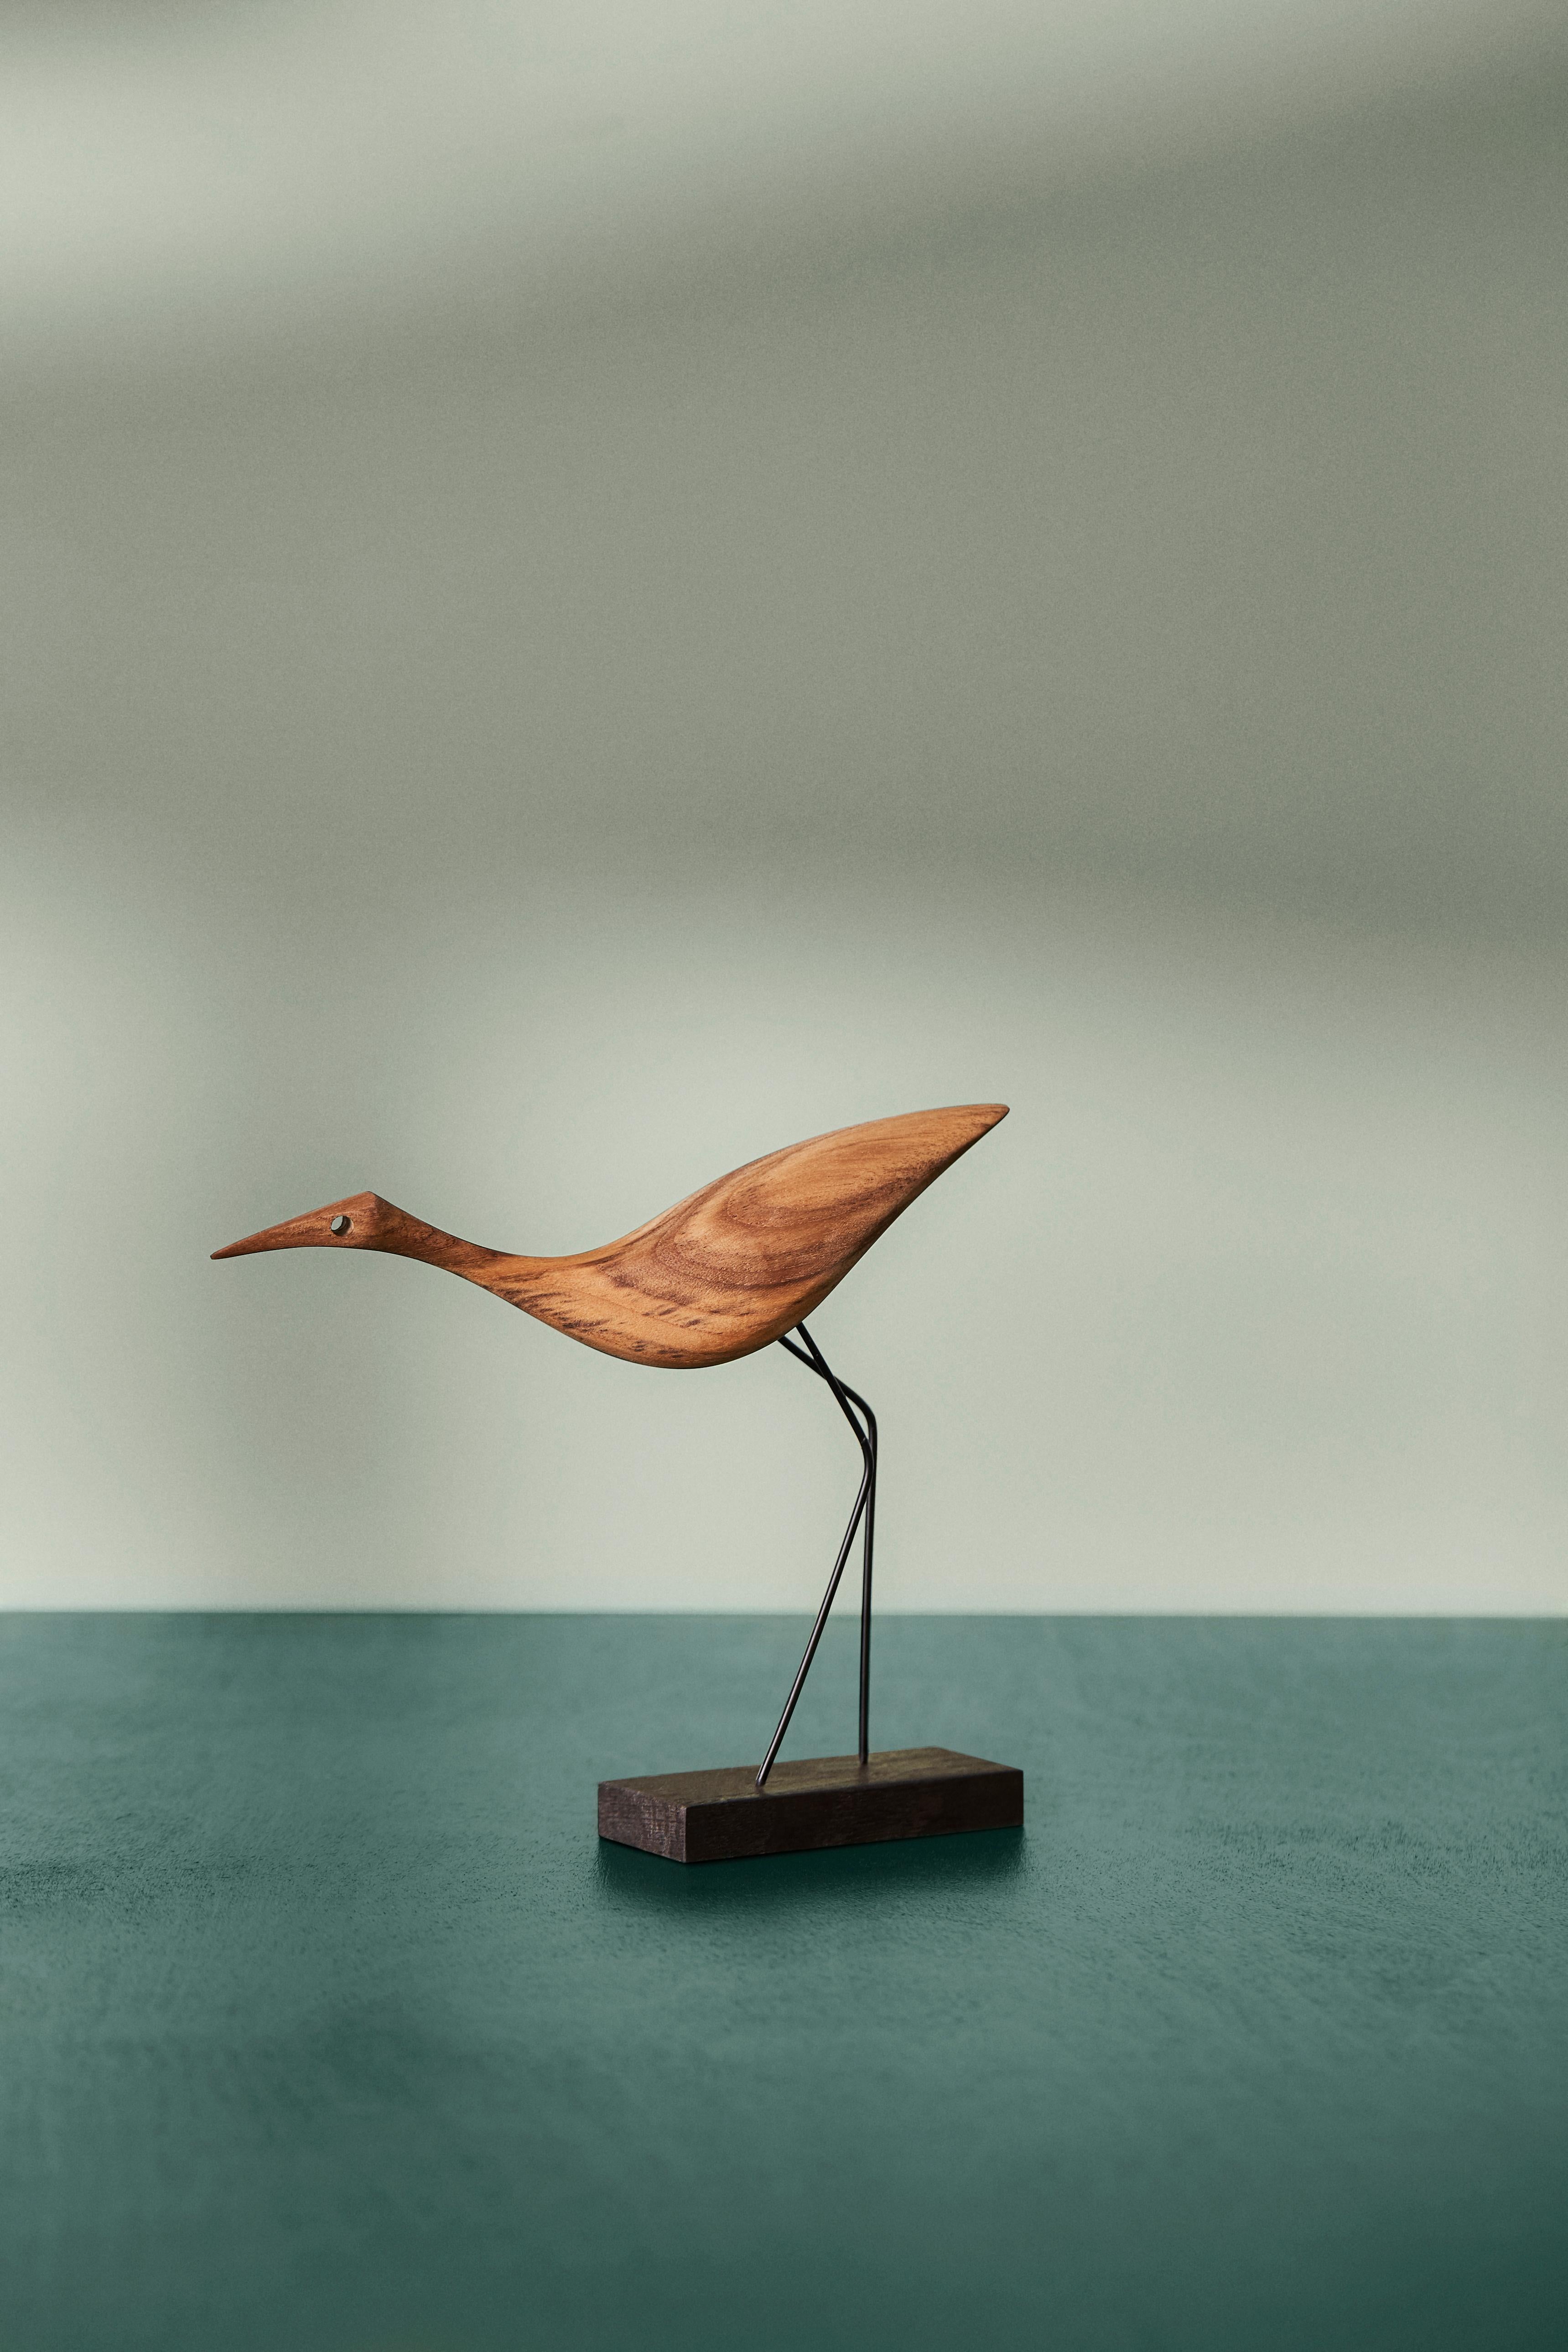 Charming teak birds with beaks and great personality. Manufactured in Denmark and designed by the internationally renowned designer, Svend Aage Holm-Sørensen, who was particularly famous for his lamp designs in the 1950s. Beak Birds brings a smile